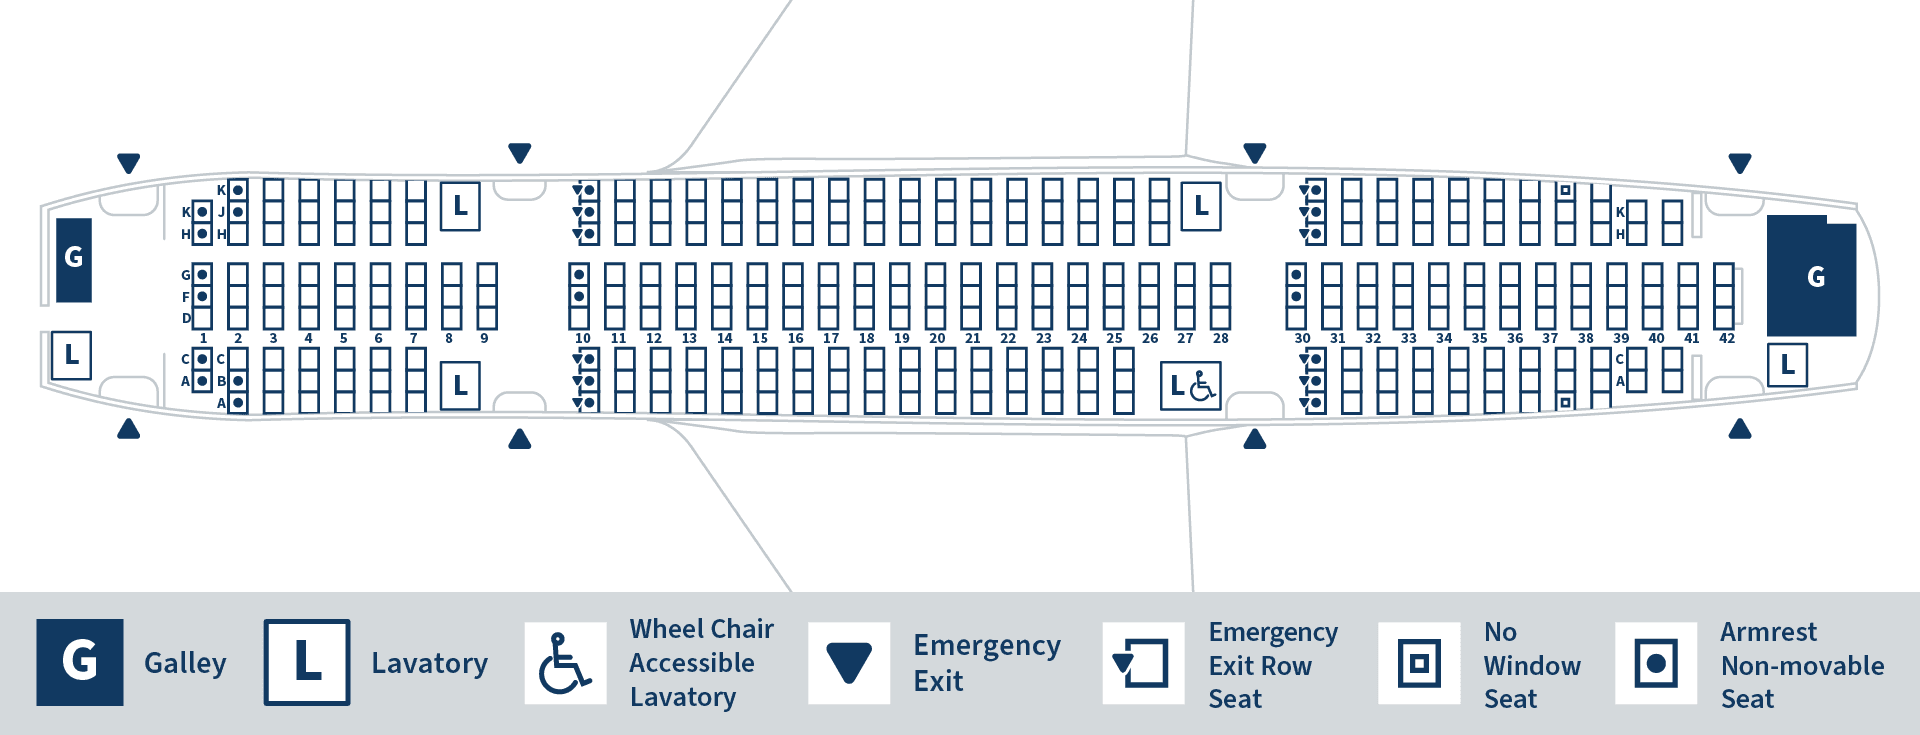 Seat map for Air Japan’s aircraft.